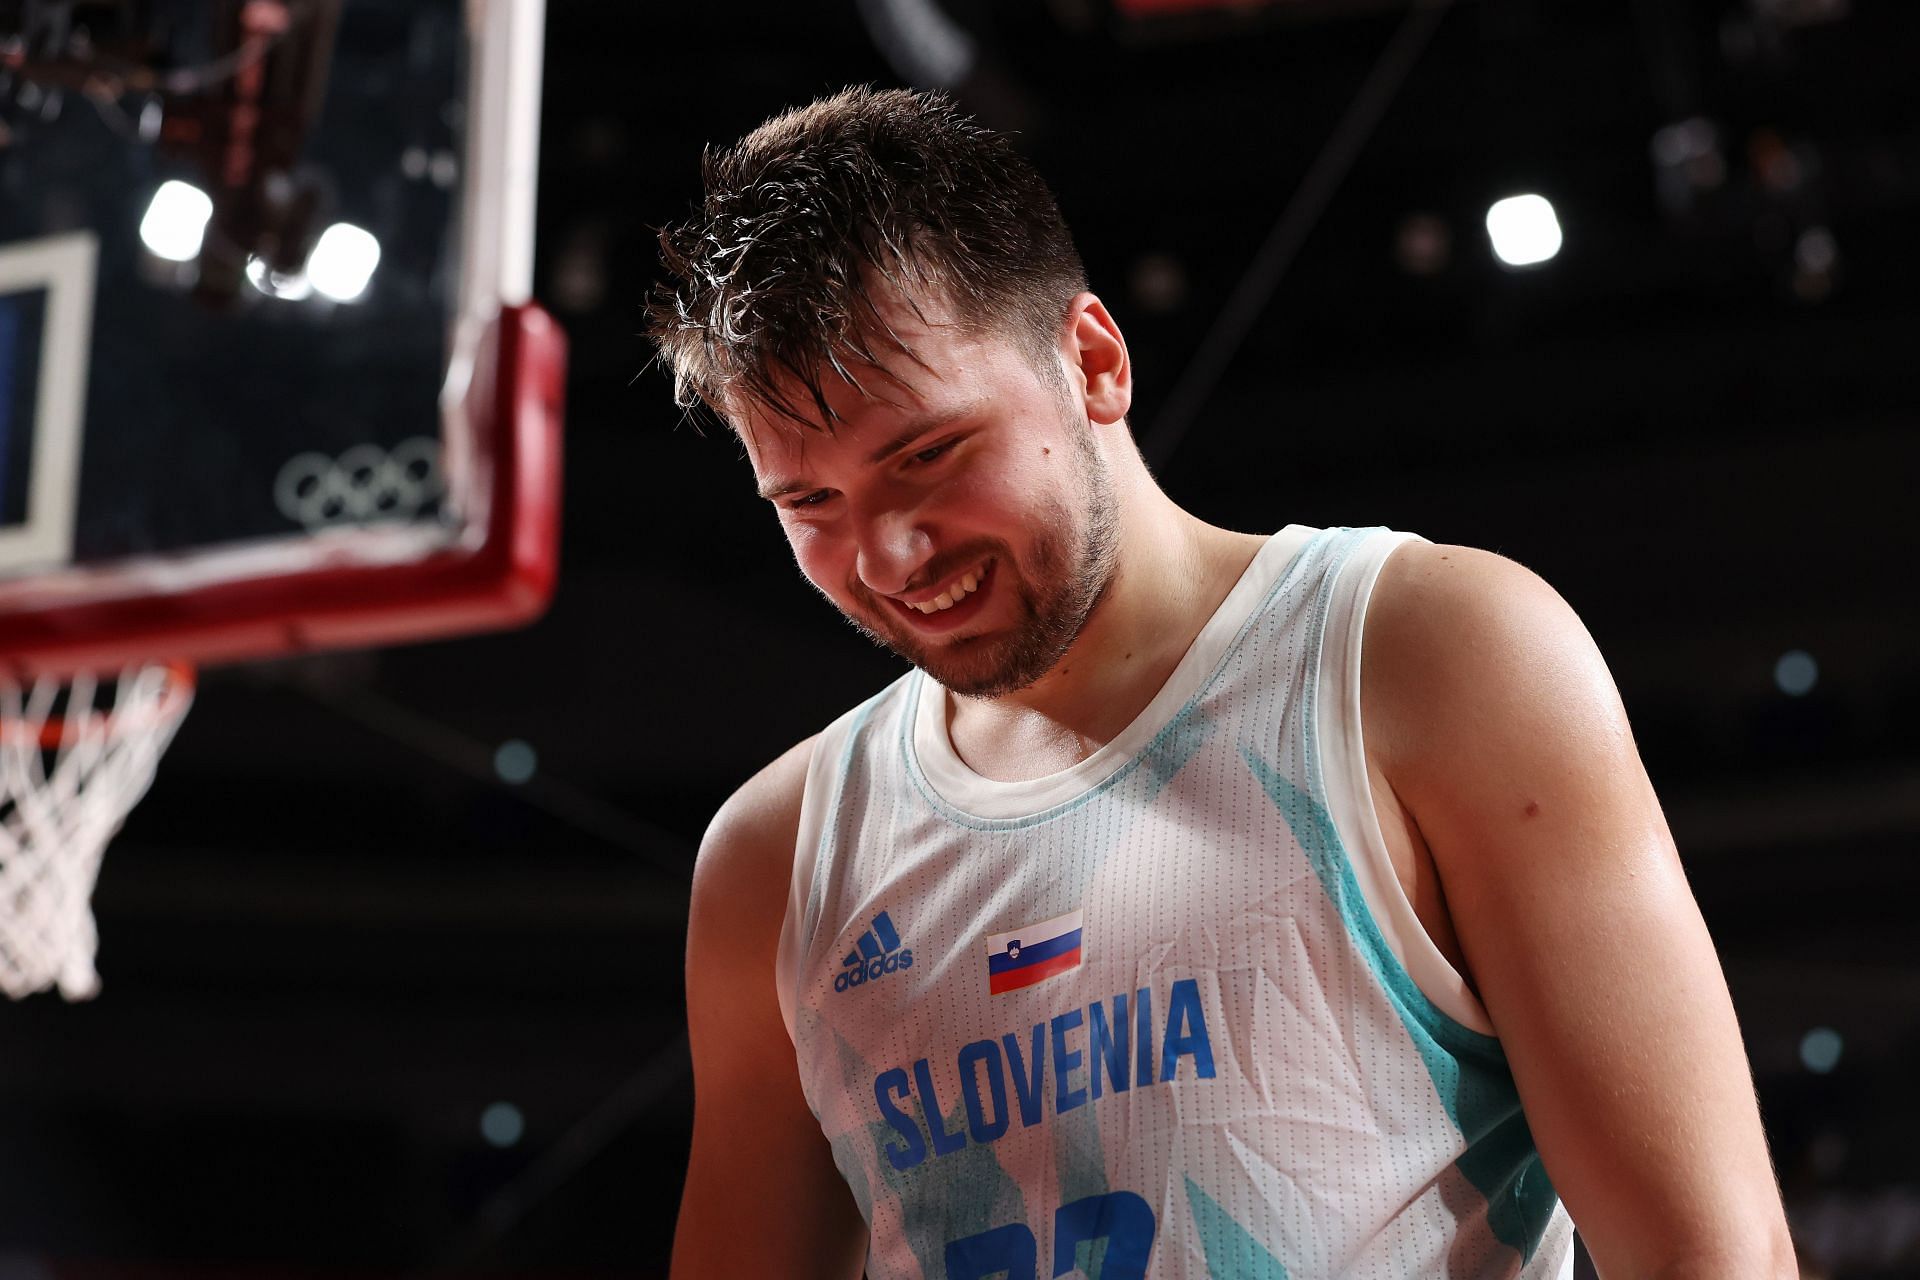 Luka Doncic playing for Slovenia in the Olympics